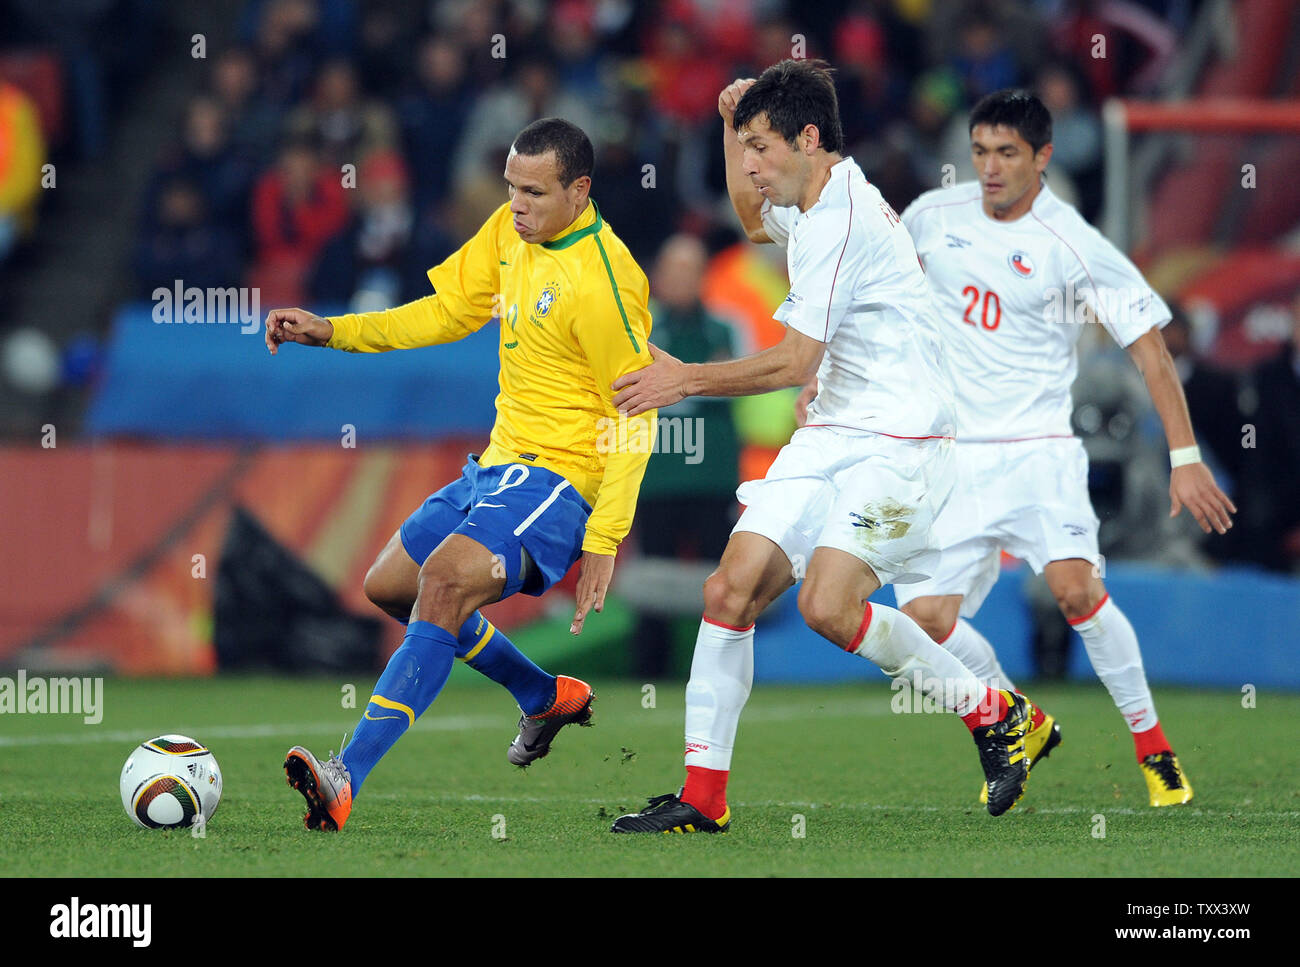 Luis Fabiano of Brazil and Pablo Contreras of Chile during the FIFA World Cup Round of 16 match at Ellis Park in Johannesburg, South Africa on June 28, 2010. UPI/Chris Brunskill Stock Photo